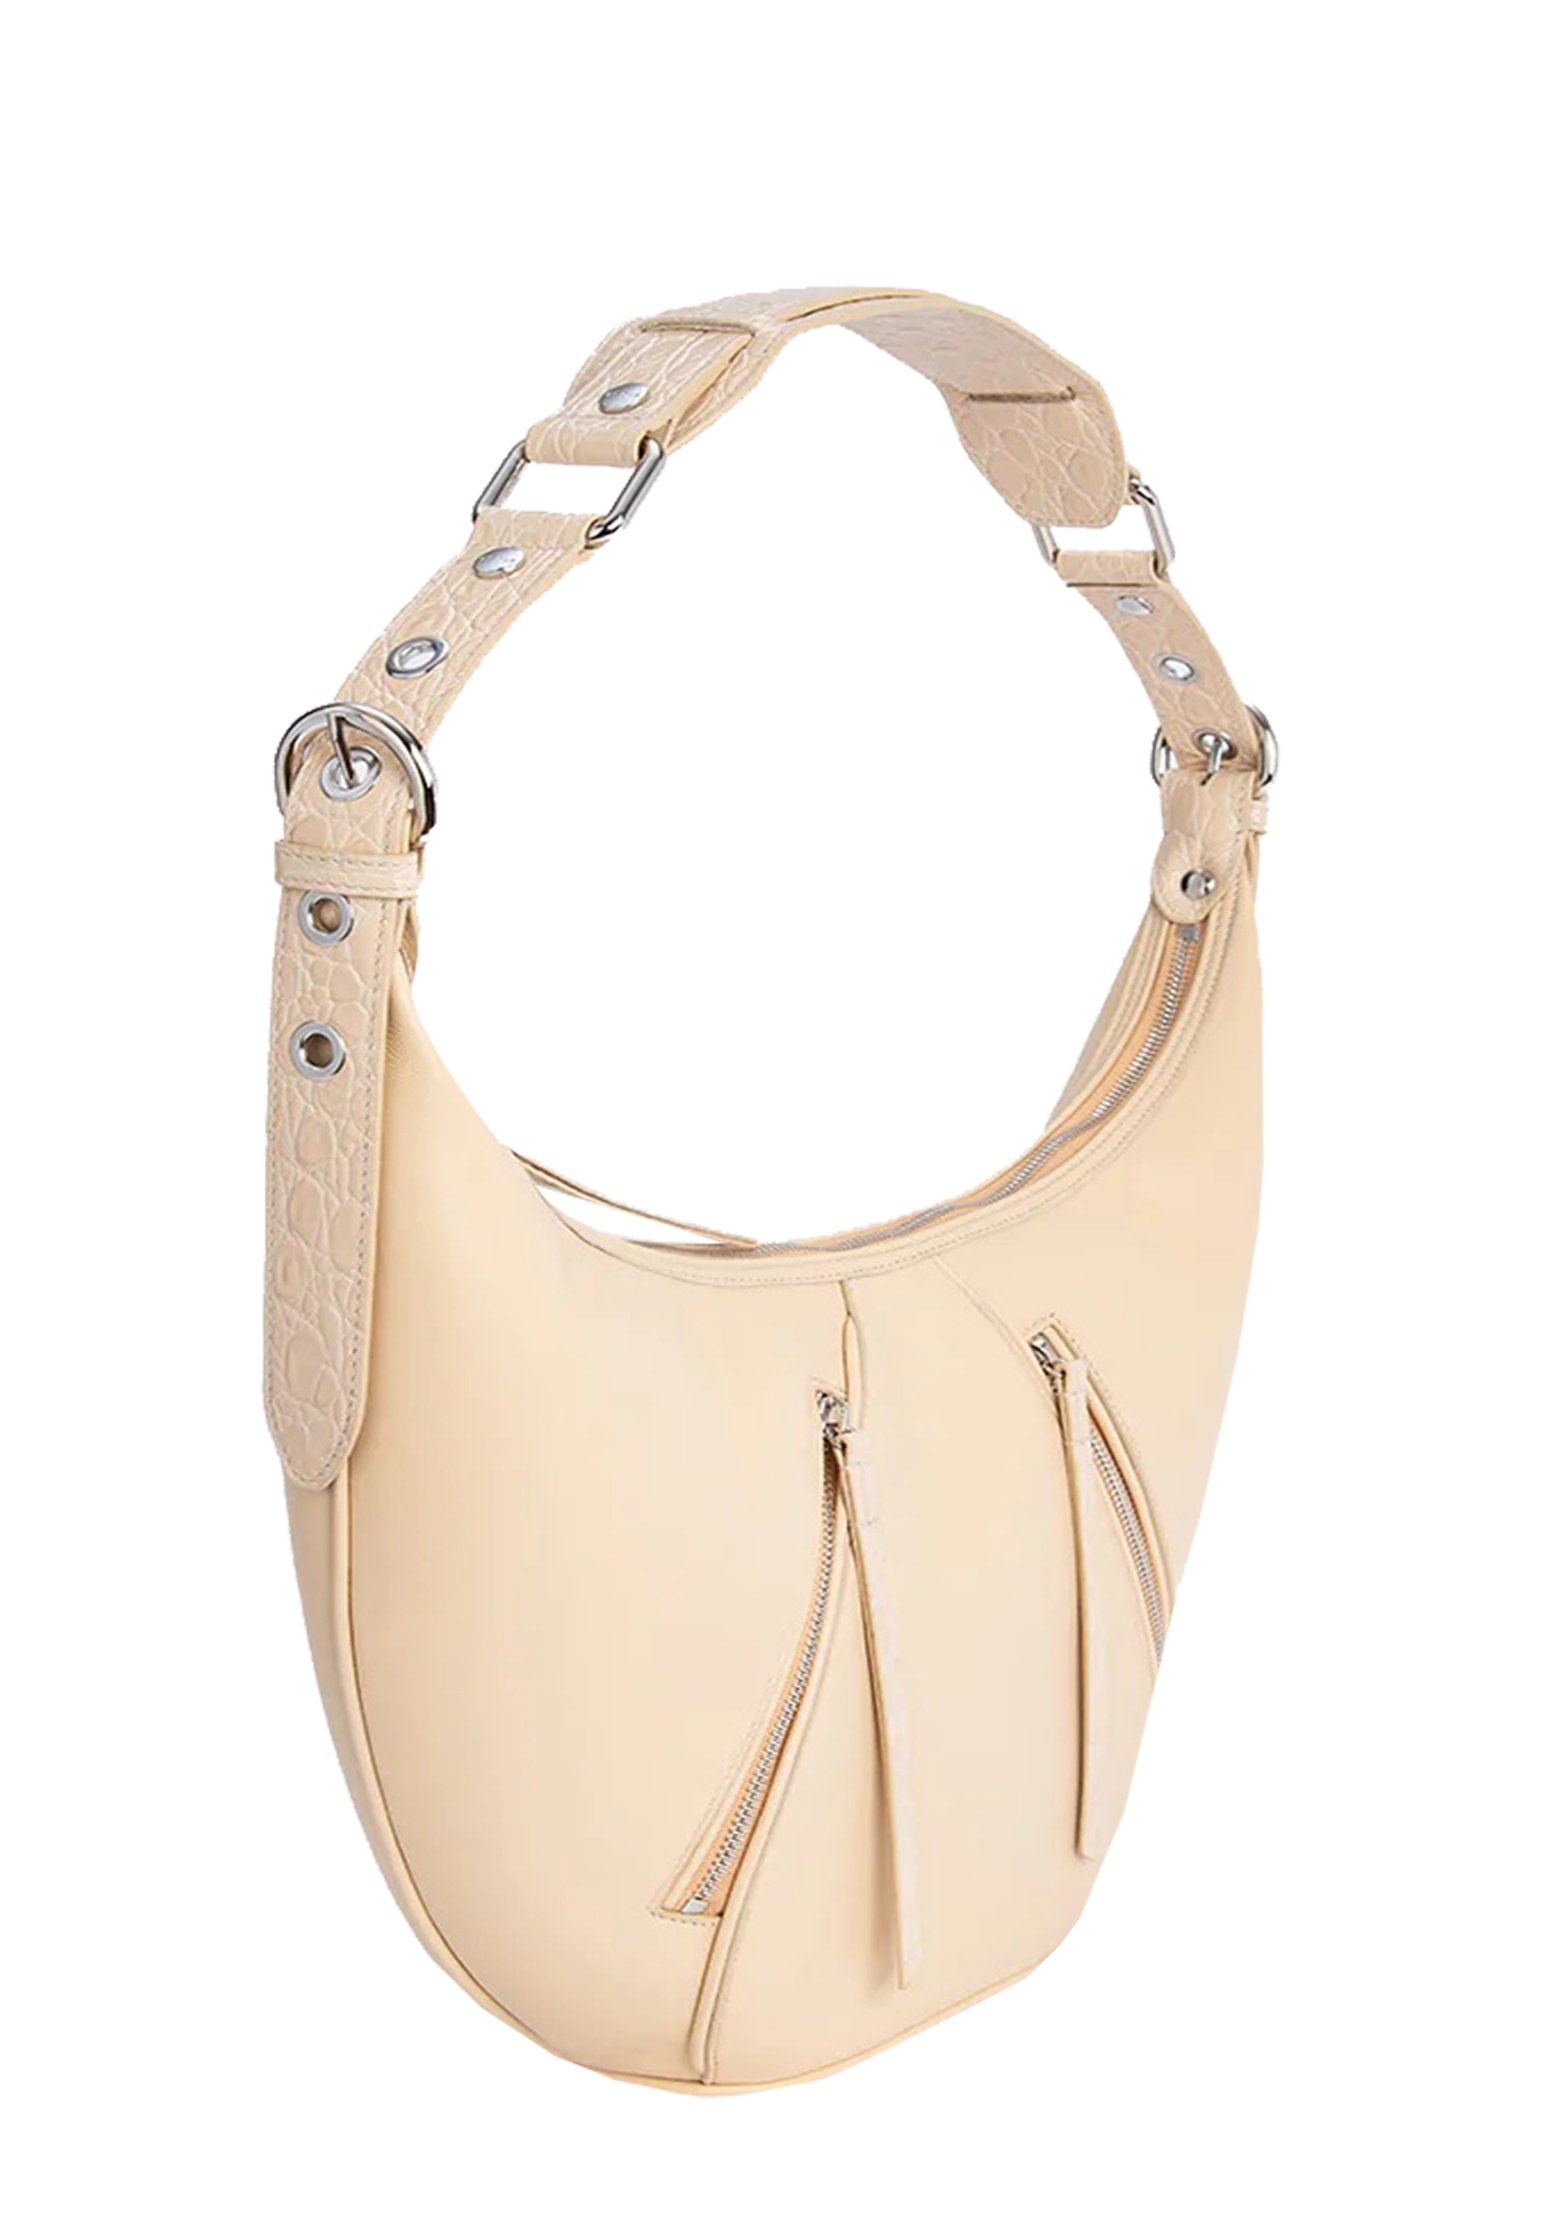 Bag BY FAR Color: beige (Code: 1142) in online store Allure